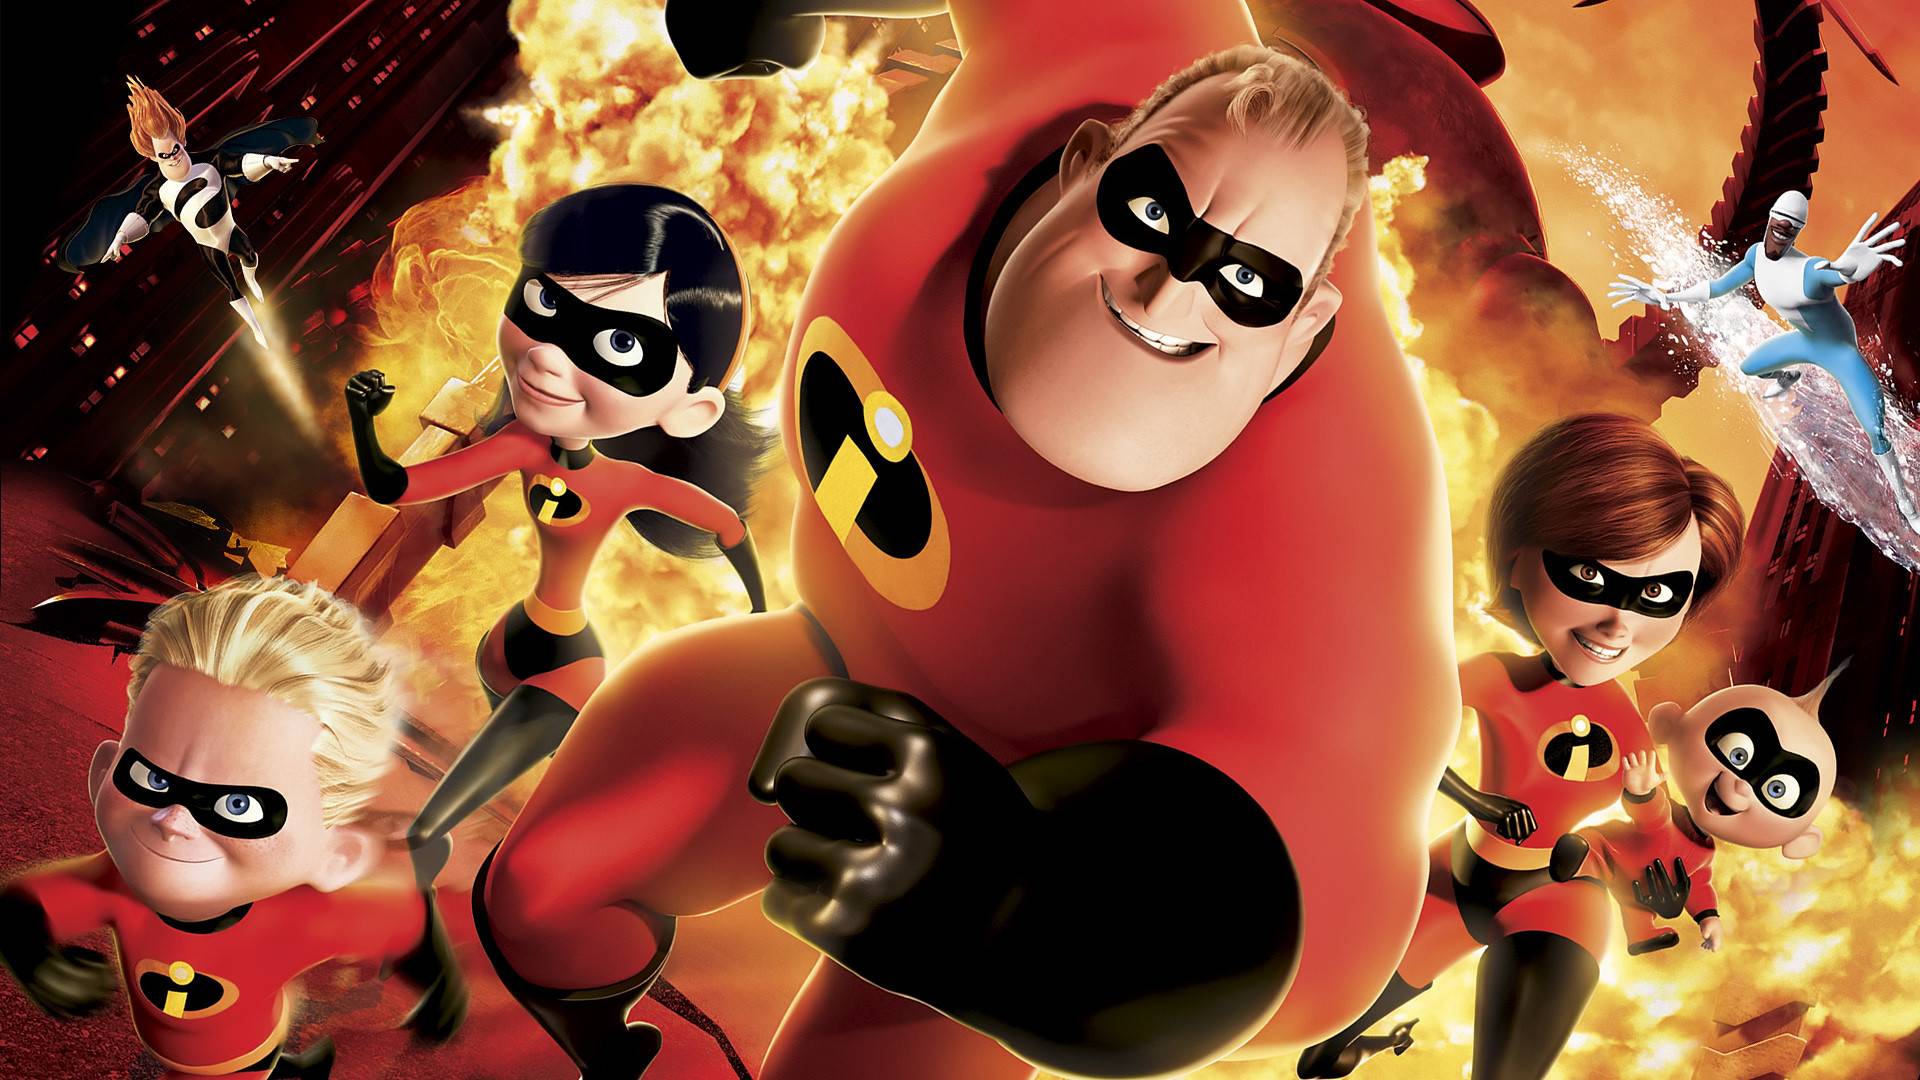 The Incredibles Wallpaper HD 44473 1920x1080 px